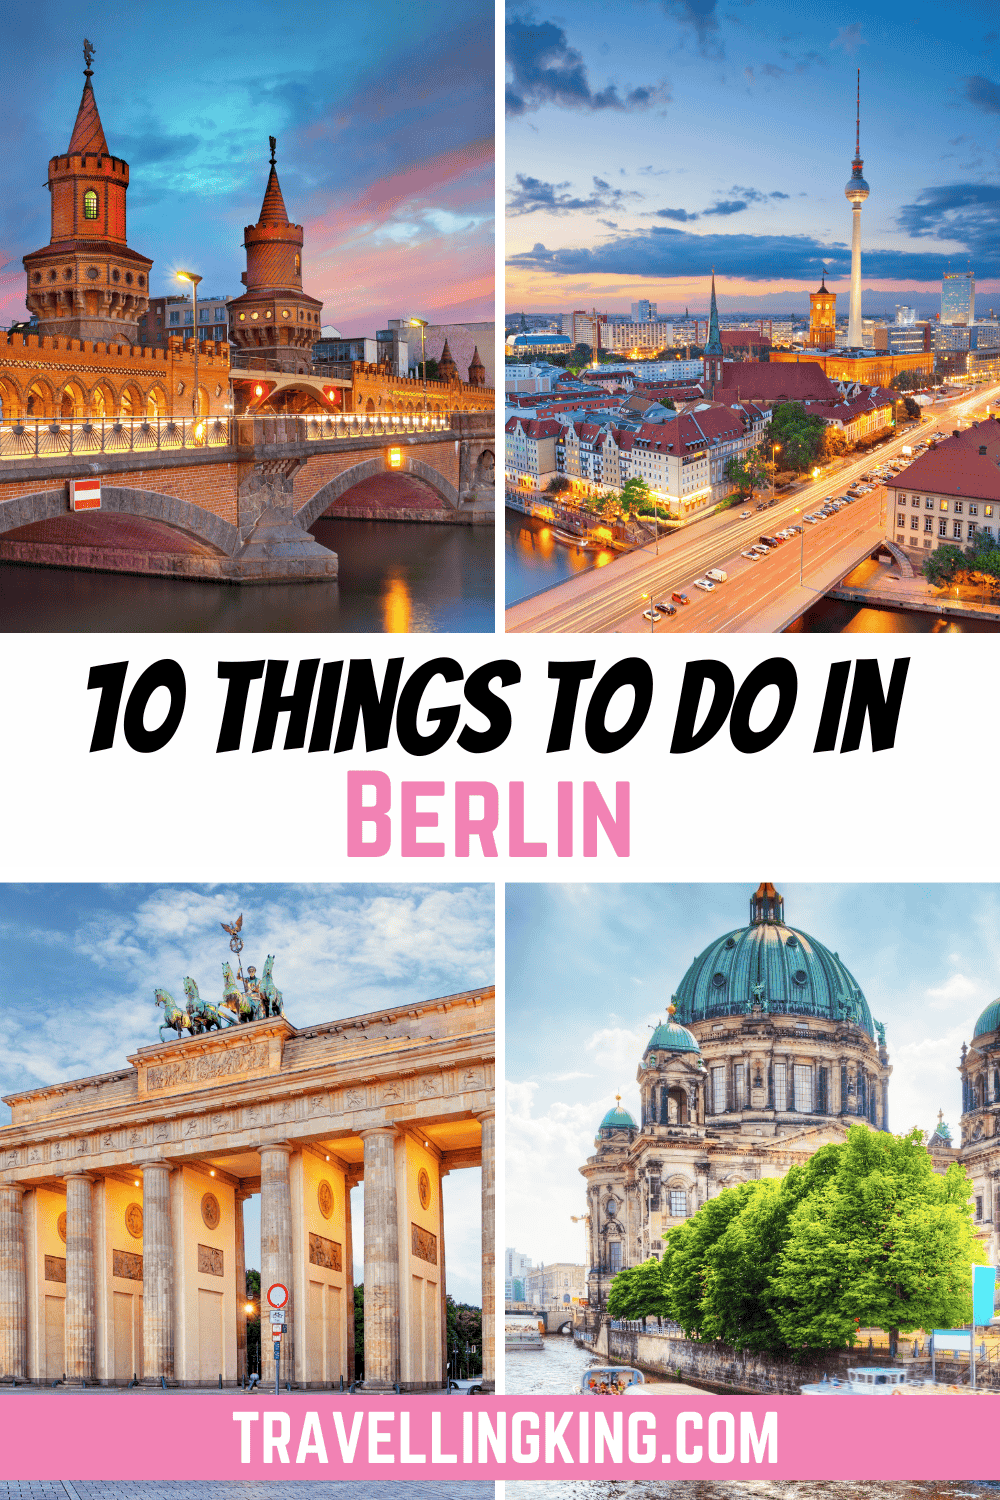 10 Things To Do In Berlin